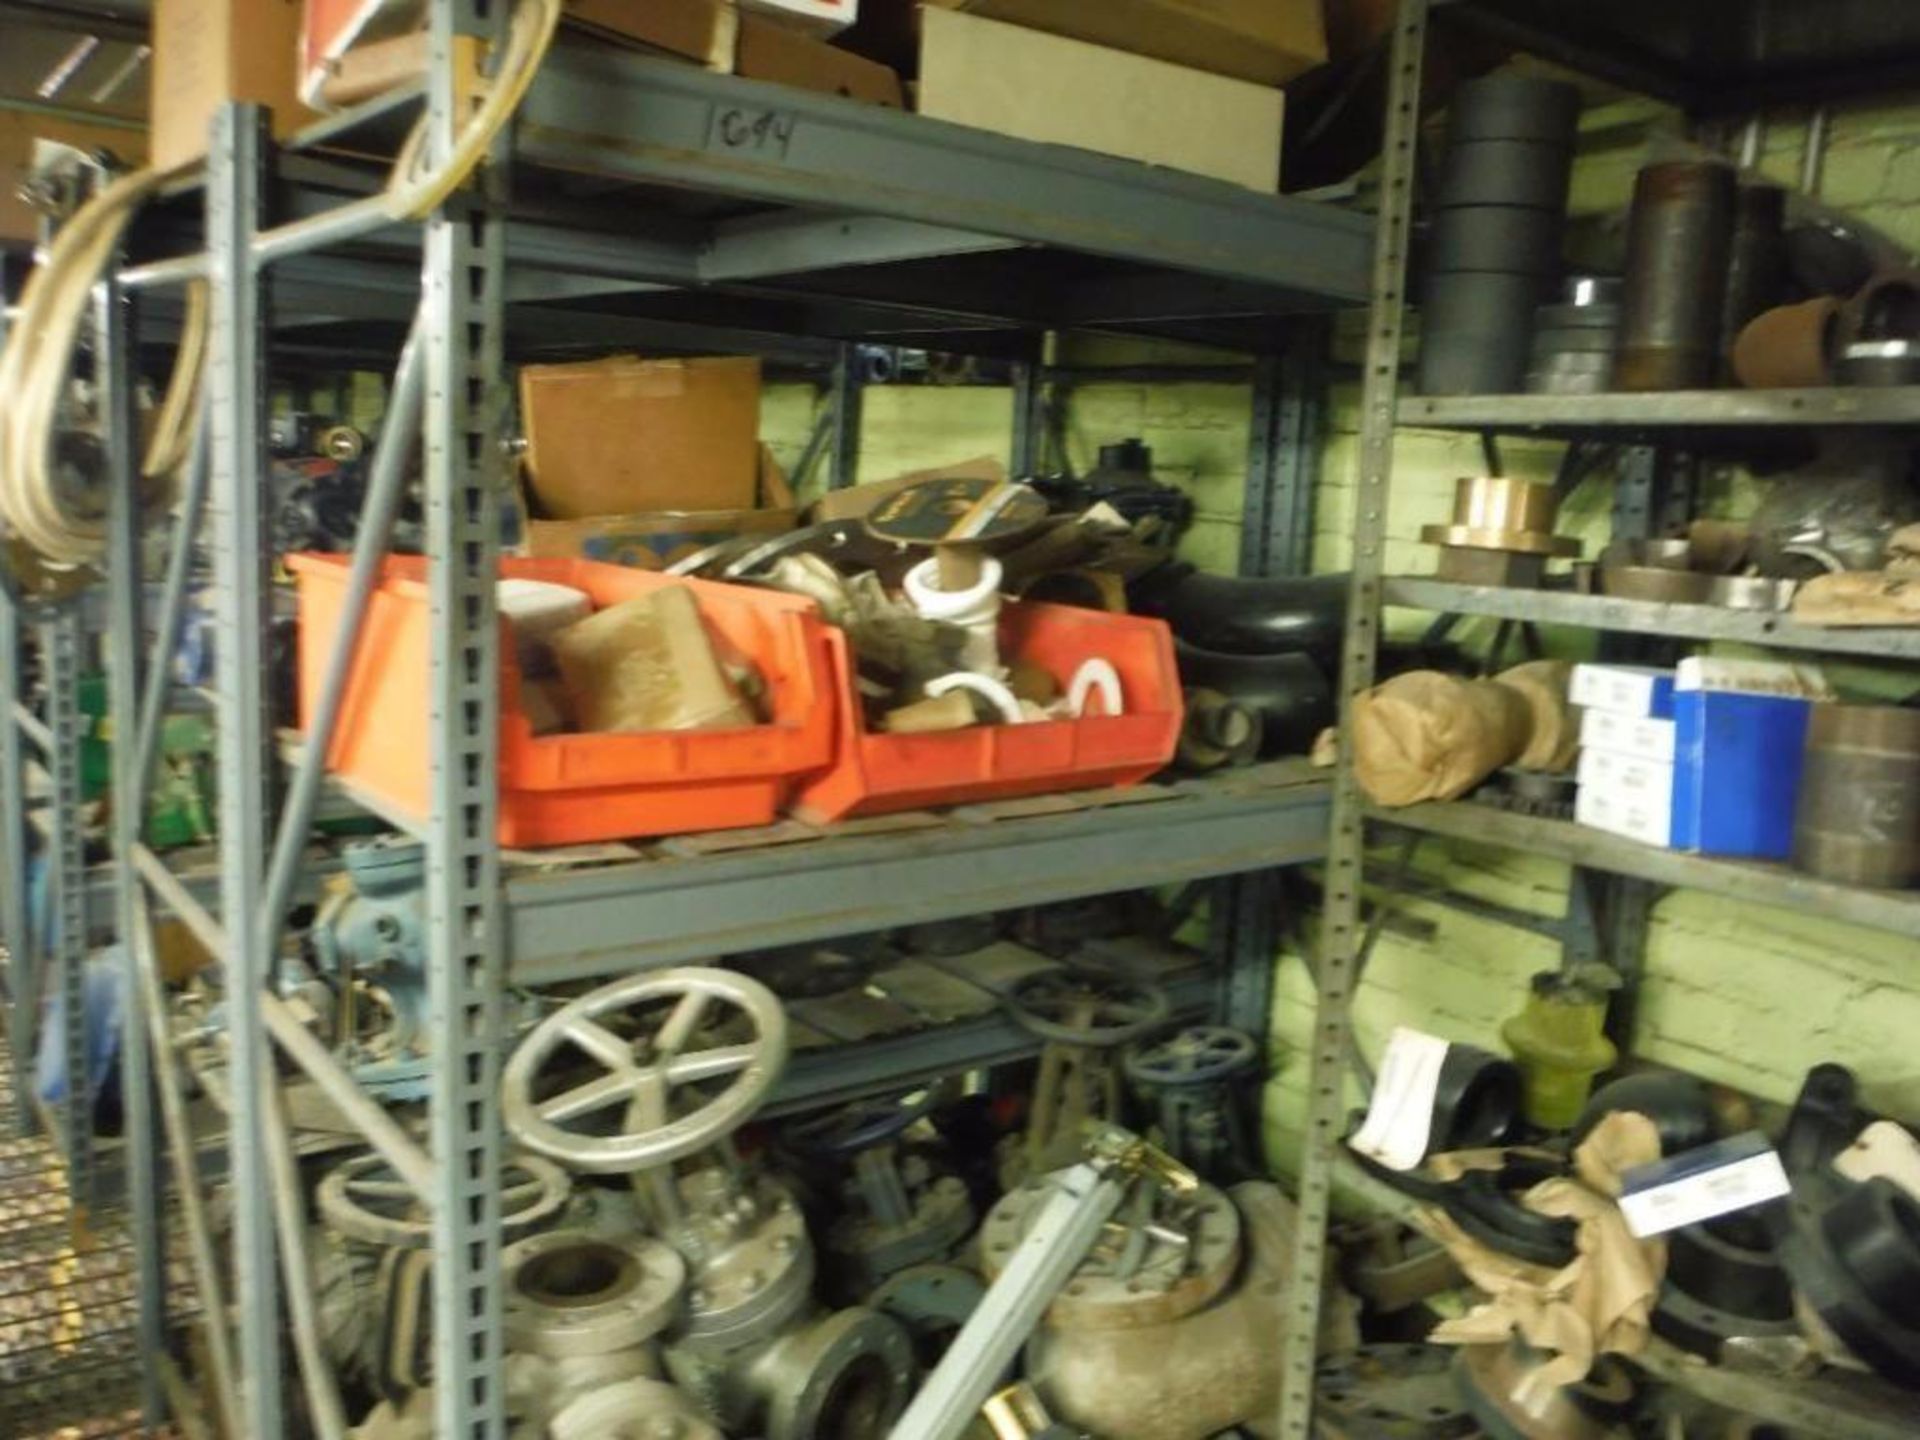 10 Shelves & content: Miscellaneous valves, fittings, brushes, and parts  Rigging Fee: $1000 - Image 7 of 14